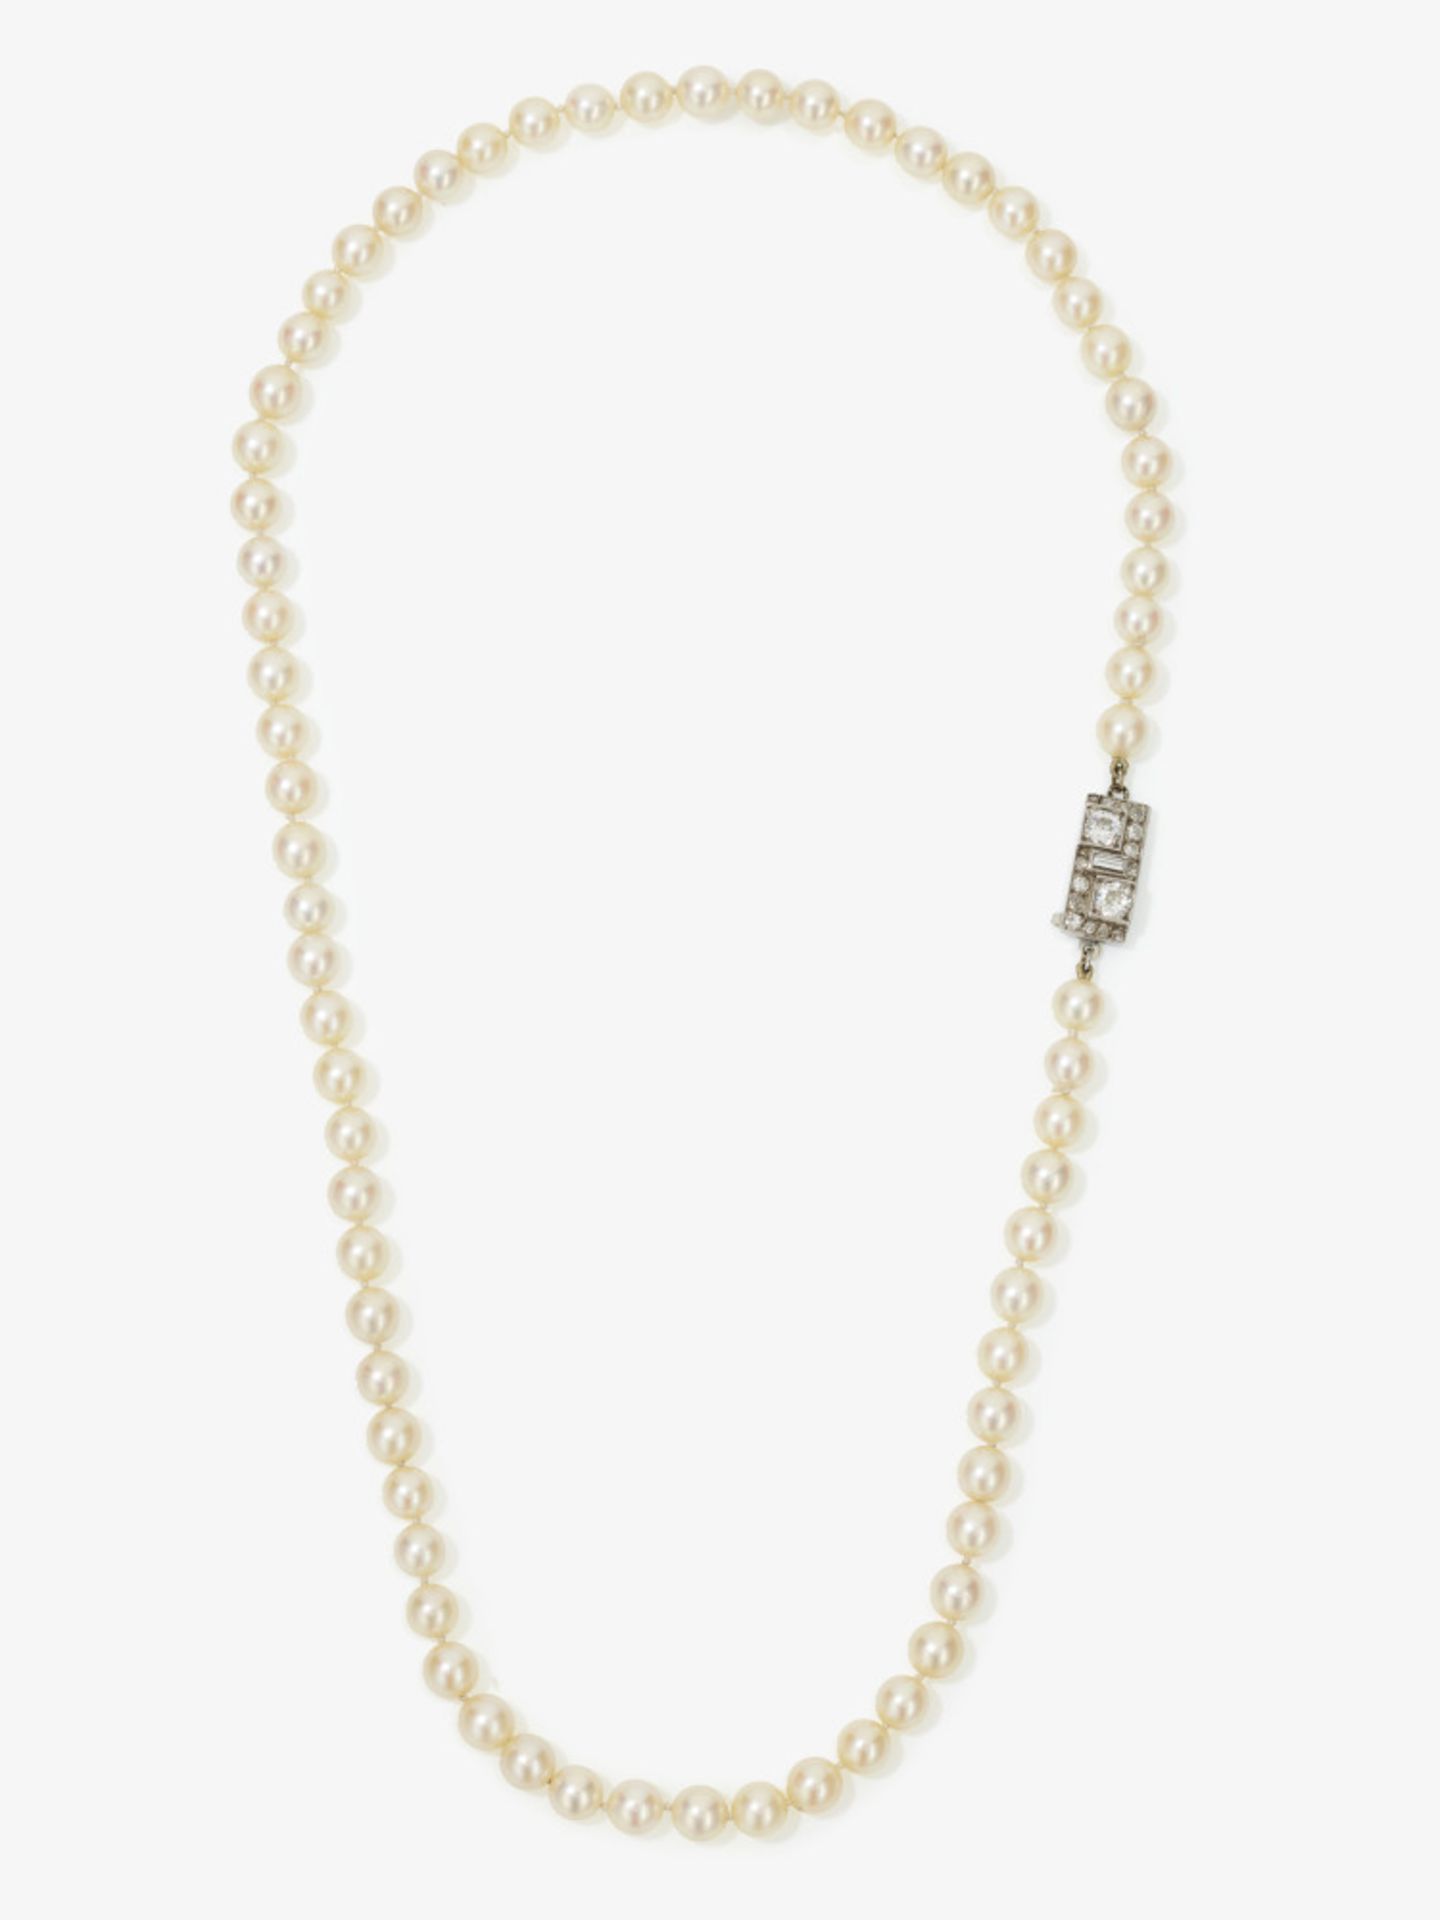 A cultured pearl necklace with diamond-studded clasp - Clasp: France, circa 1930 - Image 2 of 2